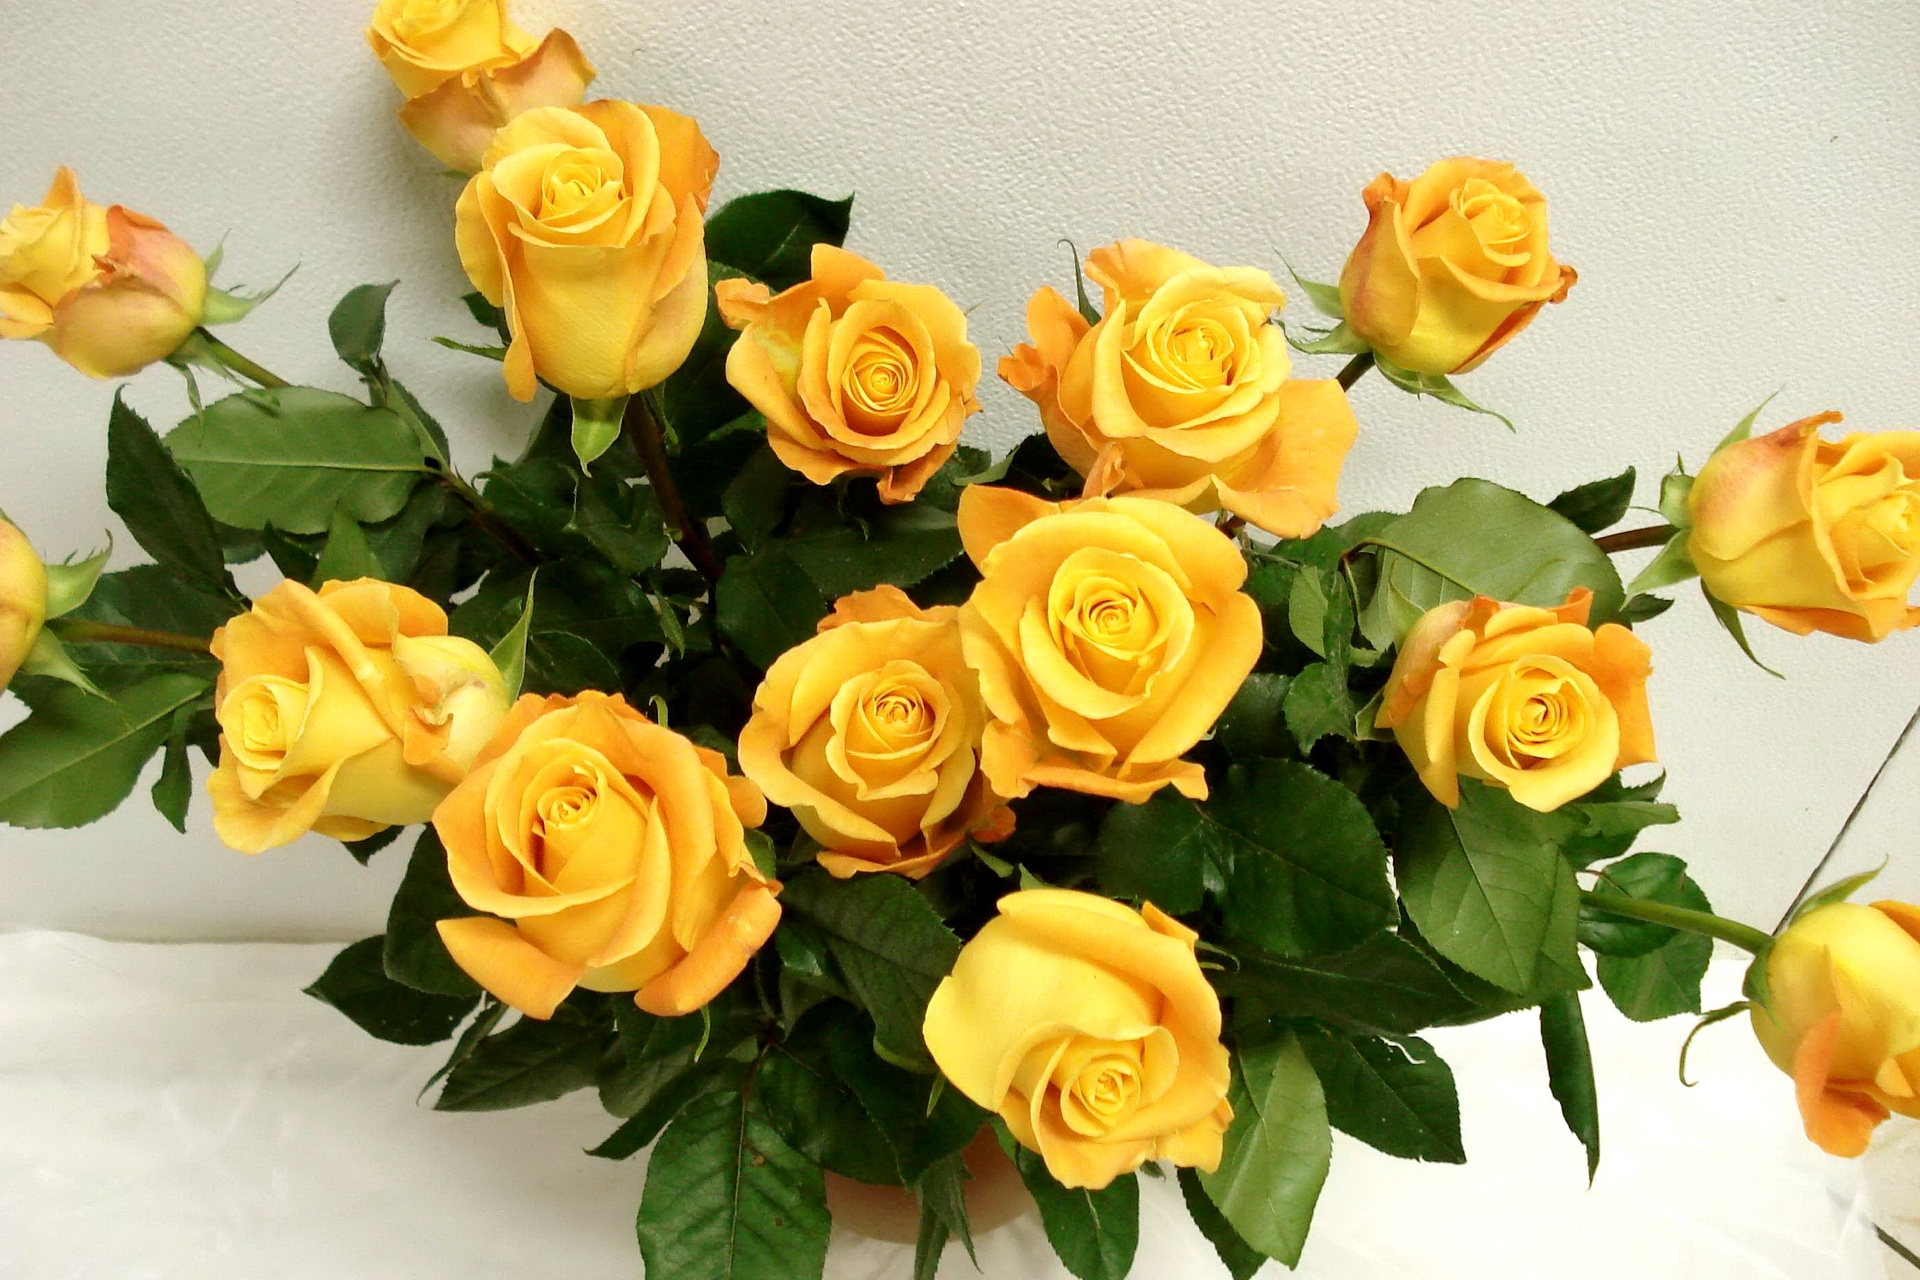 bouquet, roses, flowers, yellow, vase, gorgeous, chic Full HD